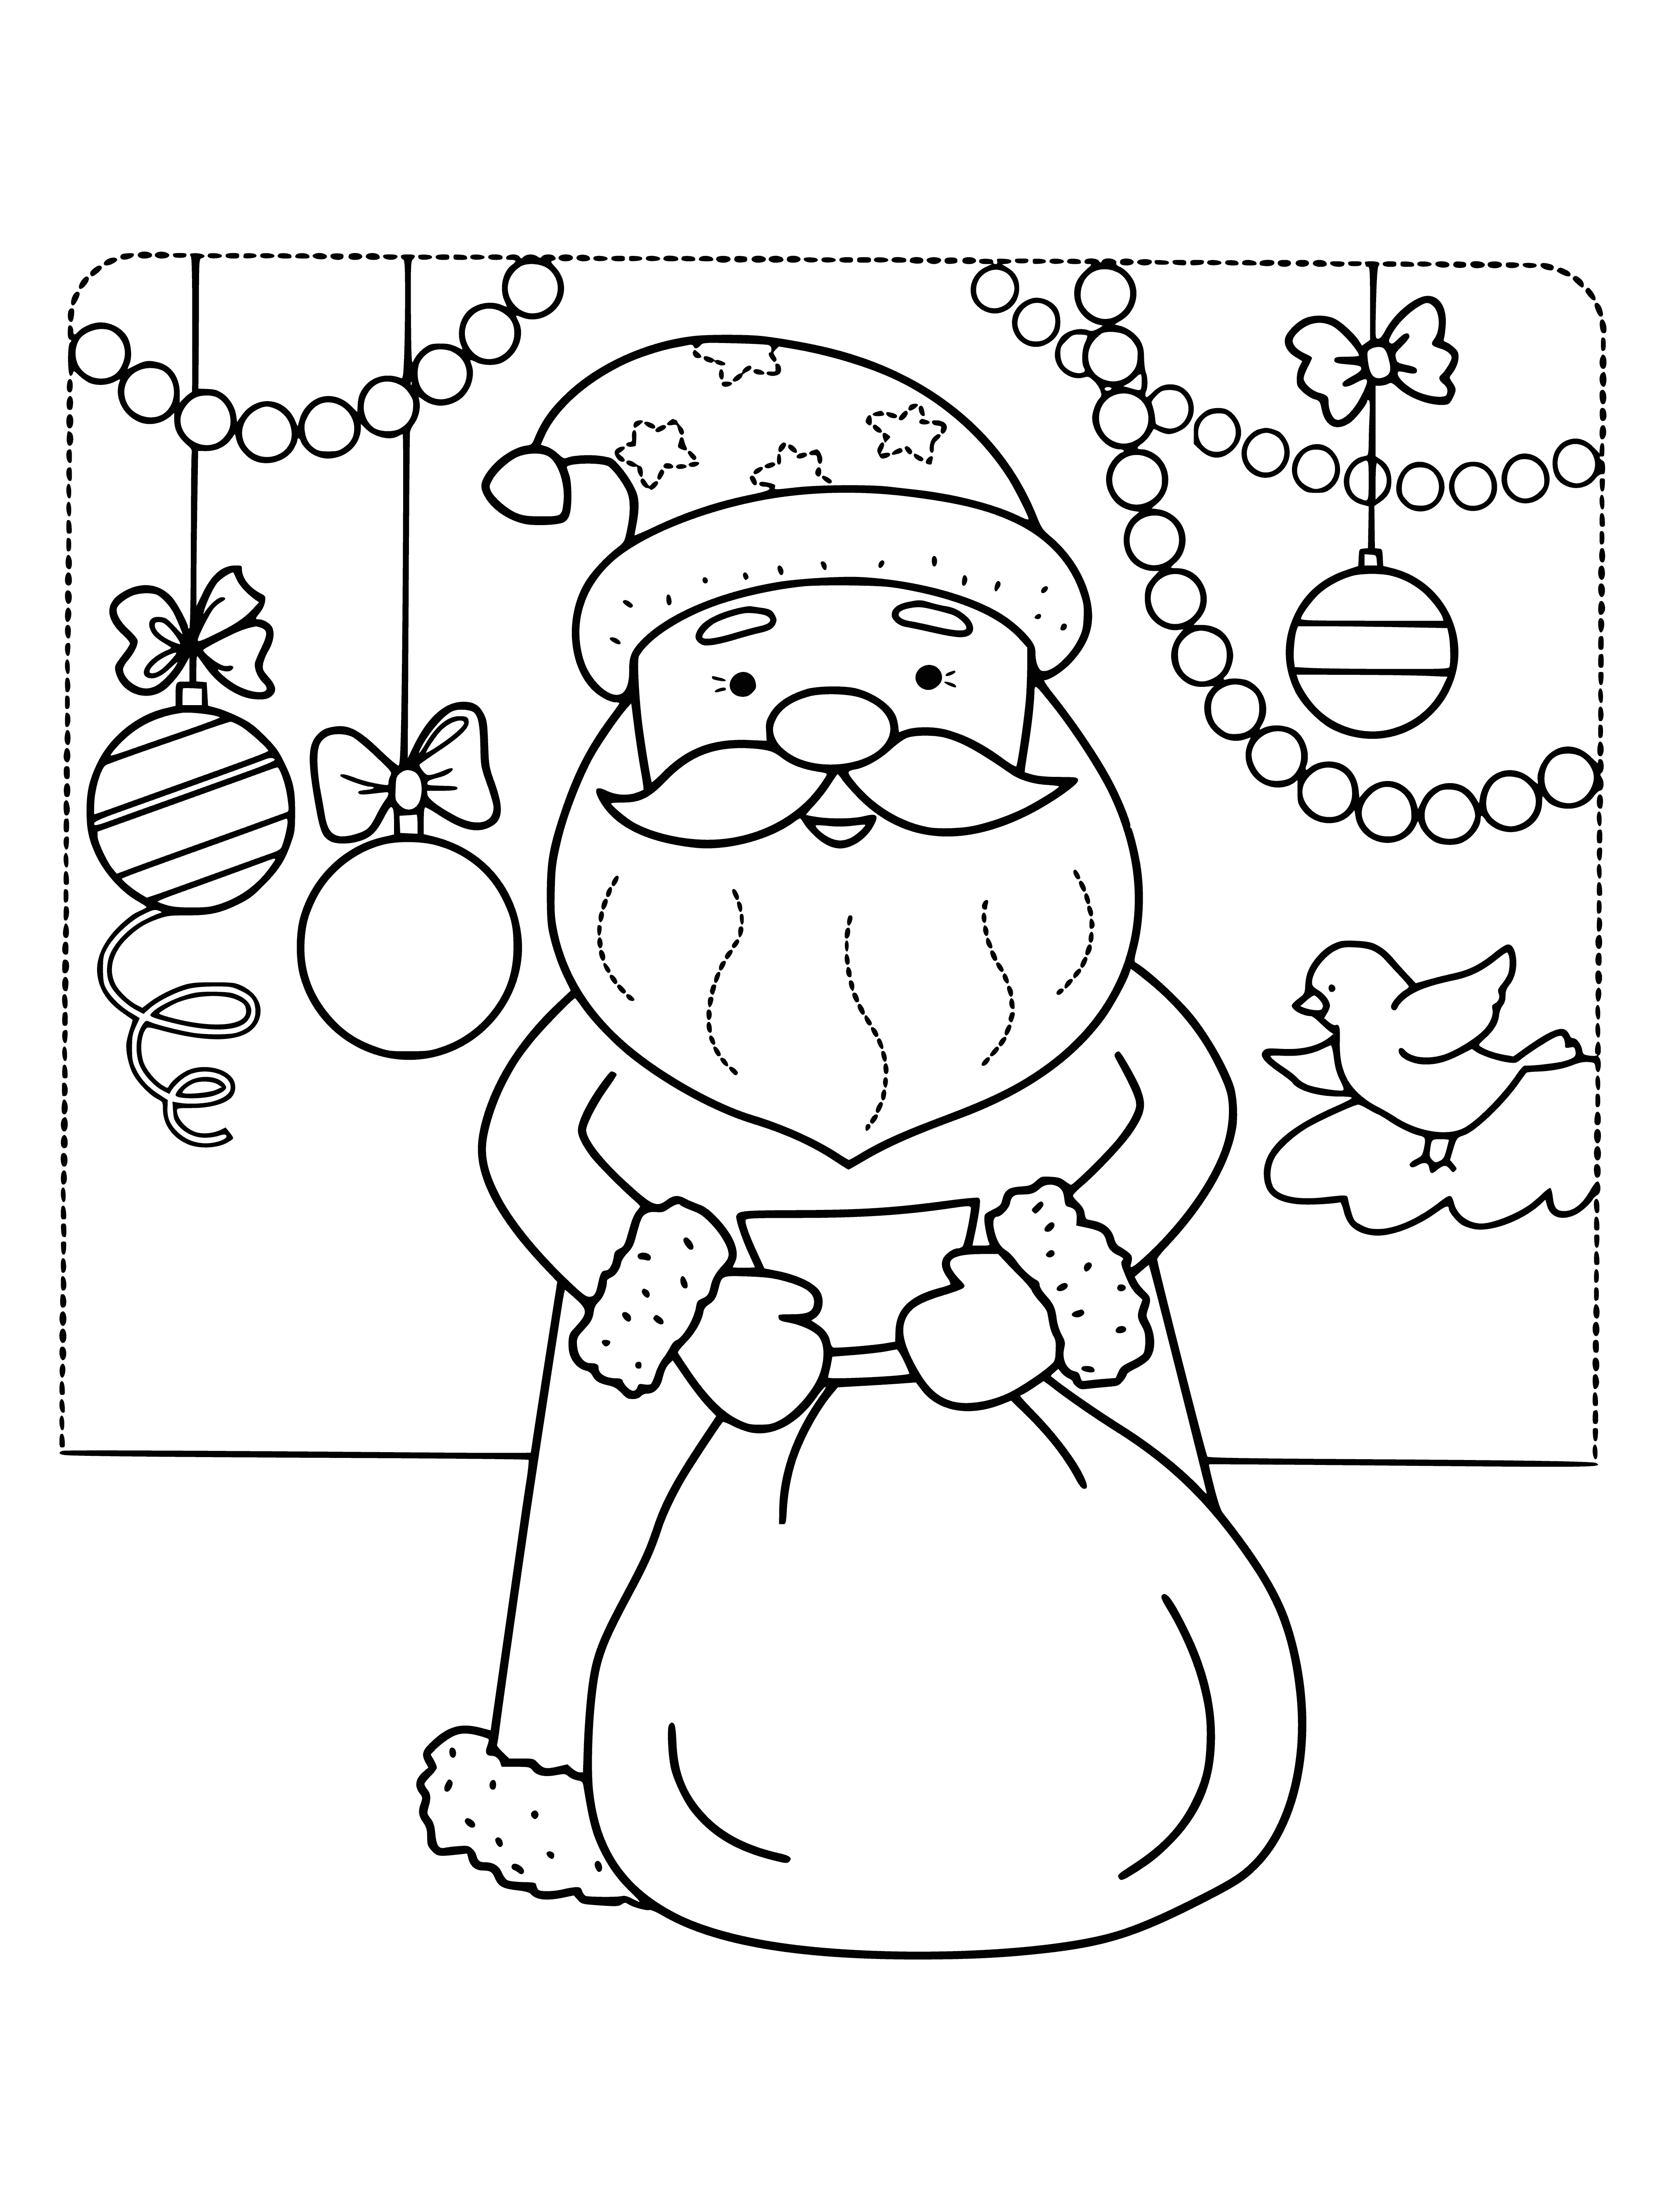 coloring page: Santa Claus is wearing a red suit and red hat with white fur trim, giving presents from his big sack.